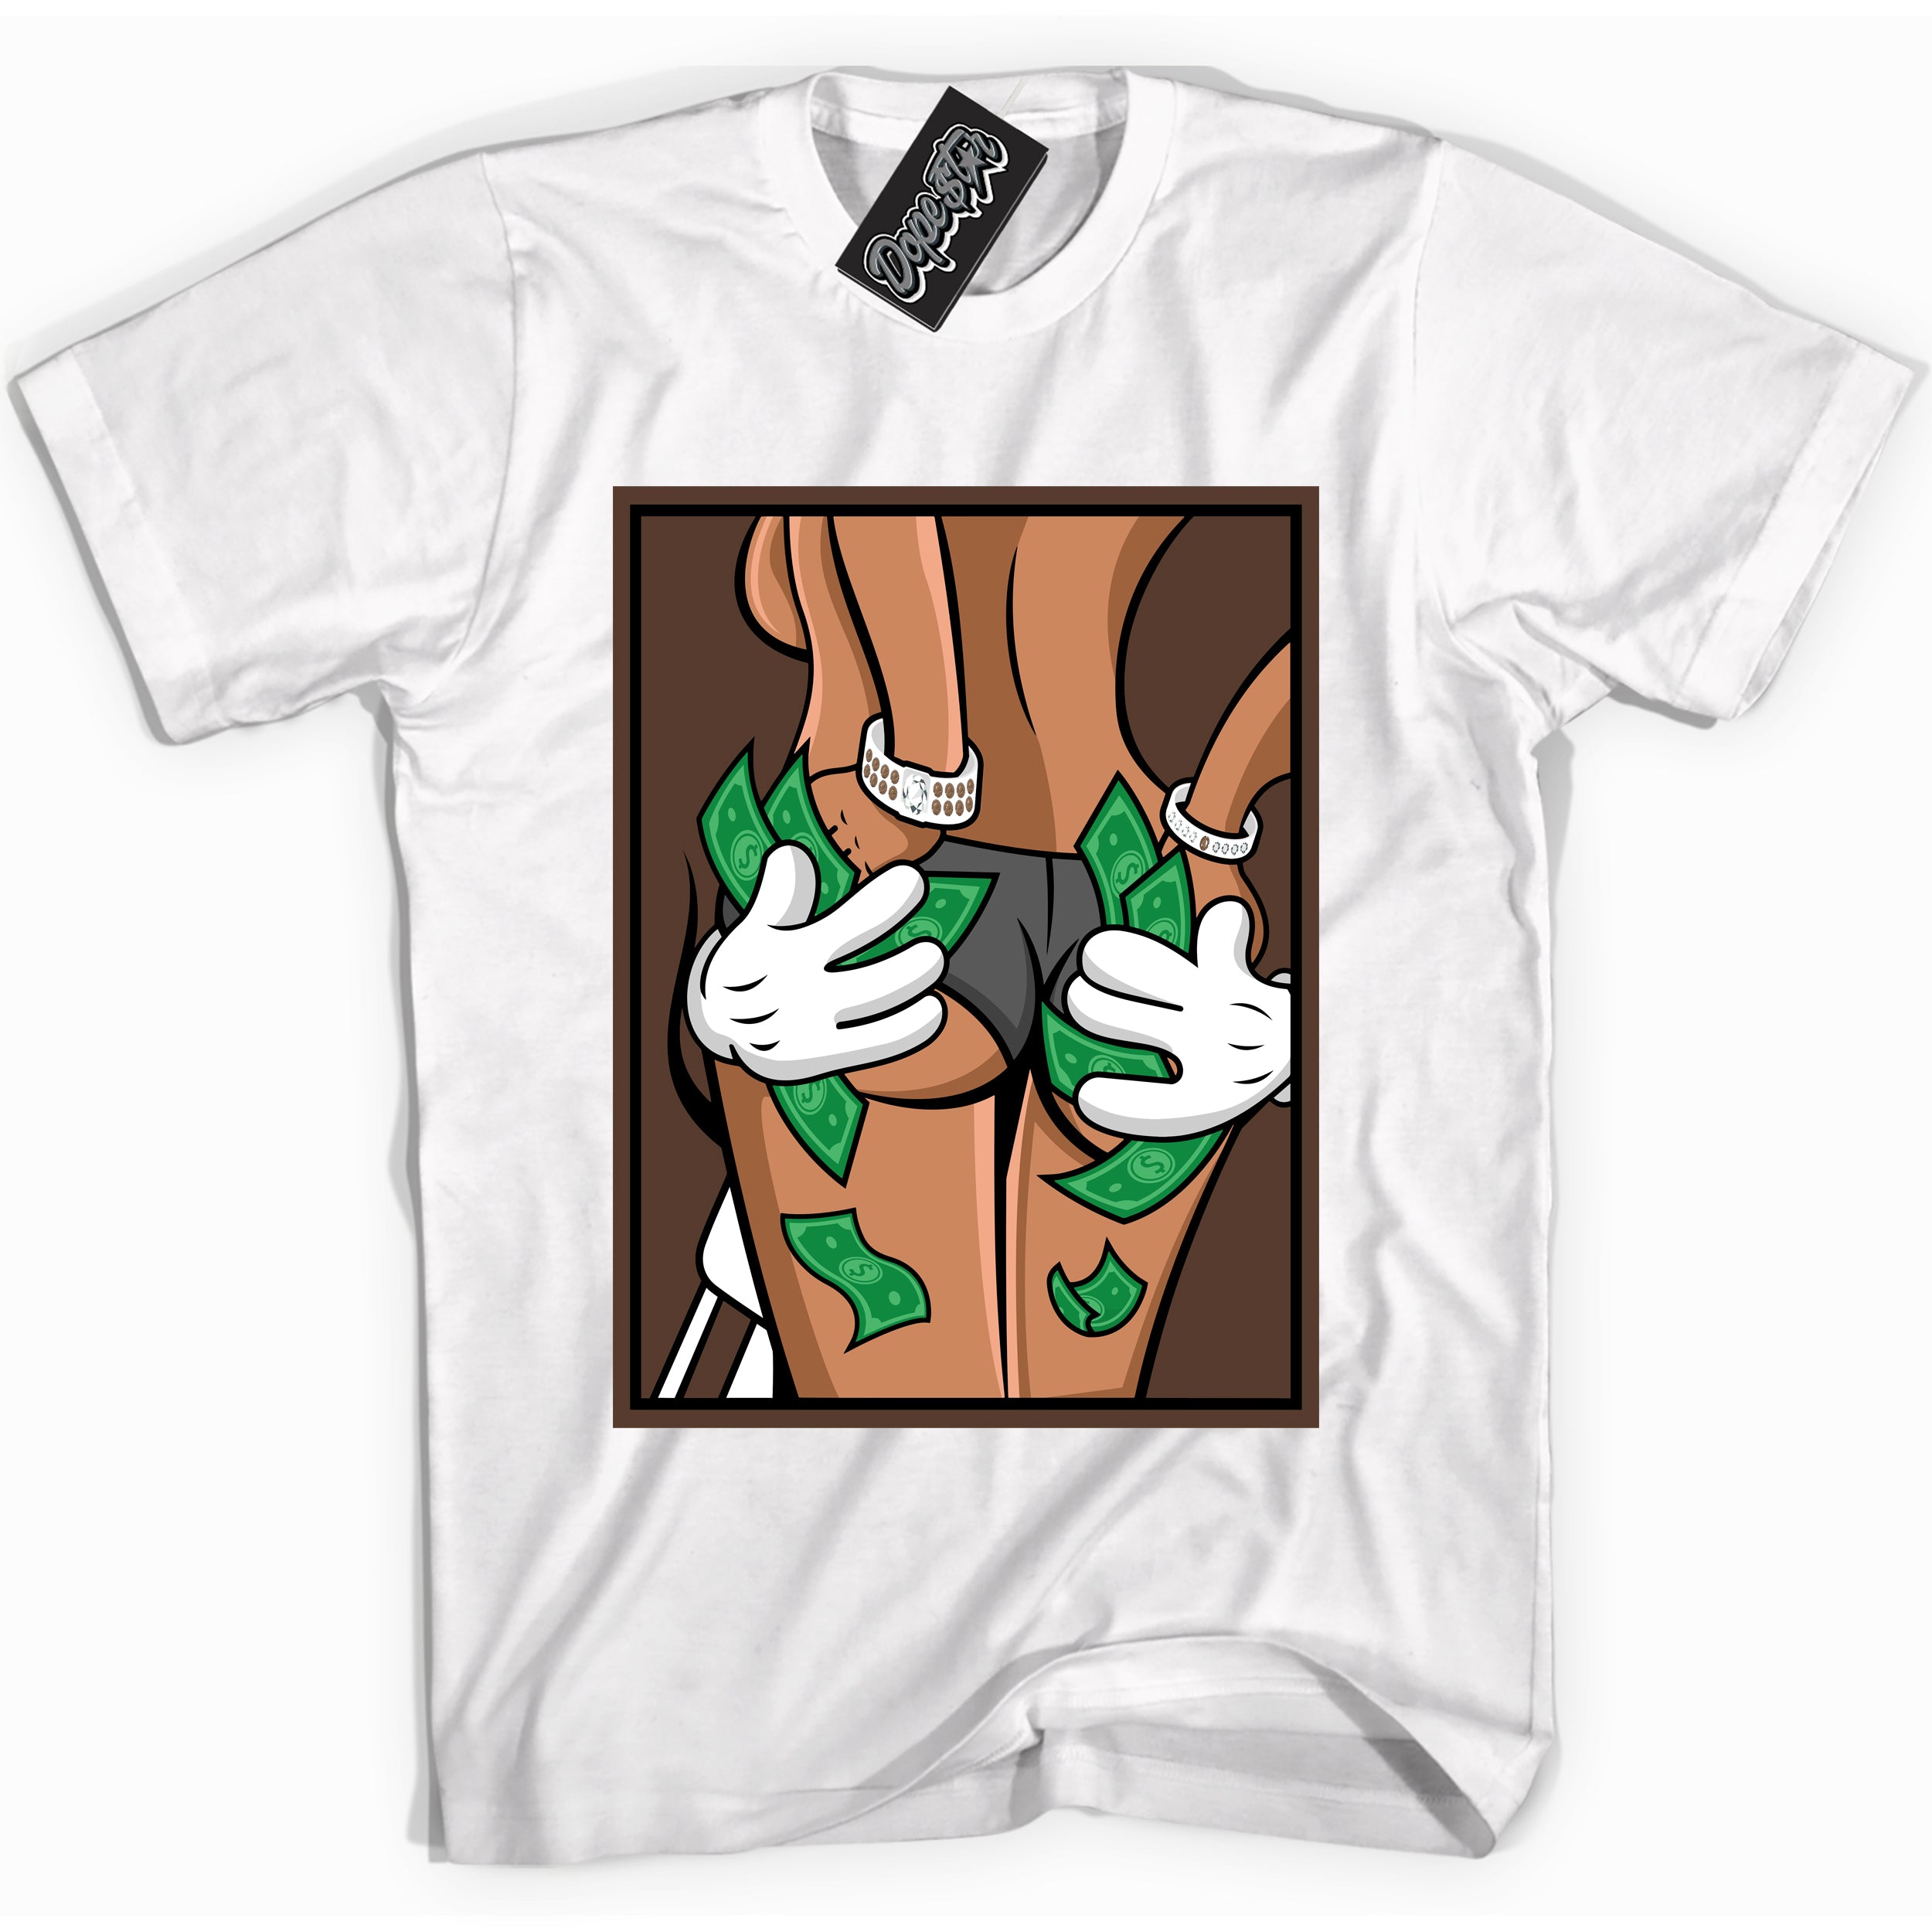 Cool White graphic tee with “ Money Hands ” design, that perfectly matches Palomino 1s sneakers 